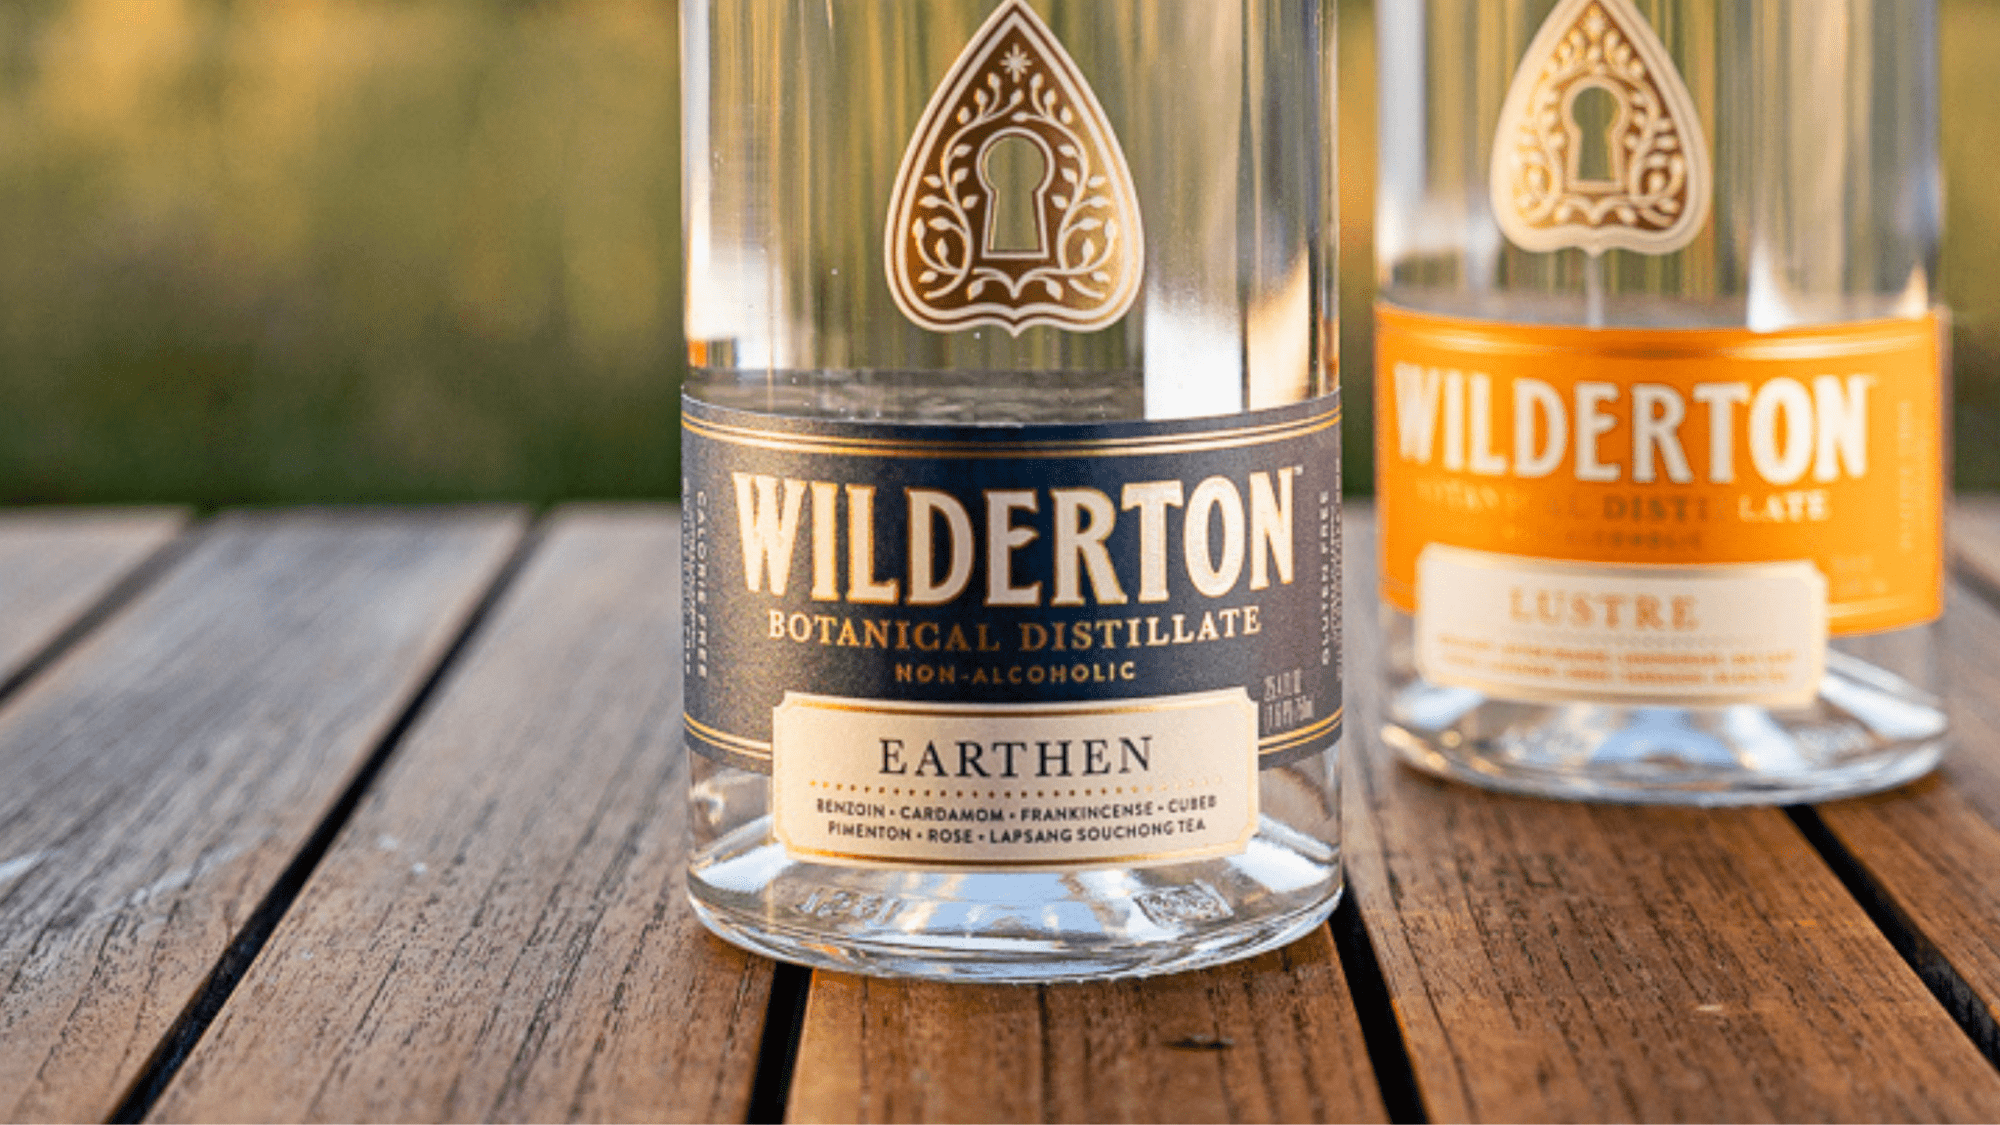 Q&A with Brad Whiting and Seth O'Malley, founders of Wilderton, water-based distilled spirits - Boisson